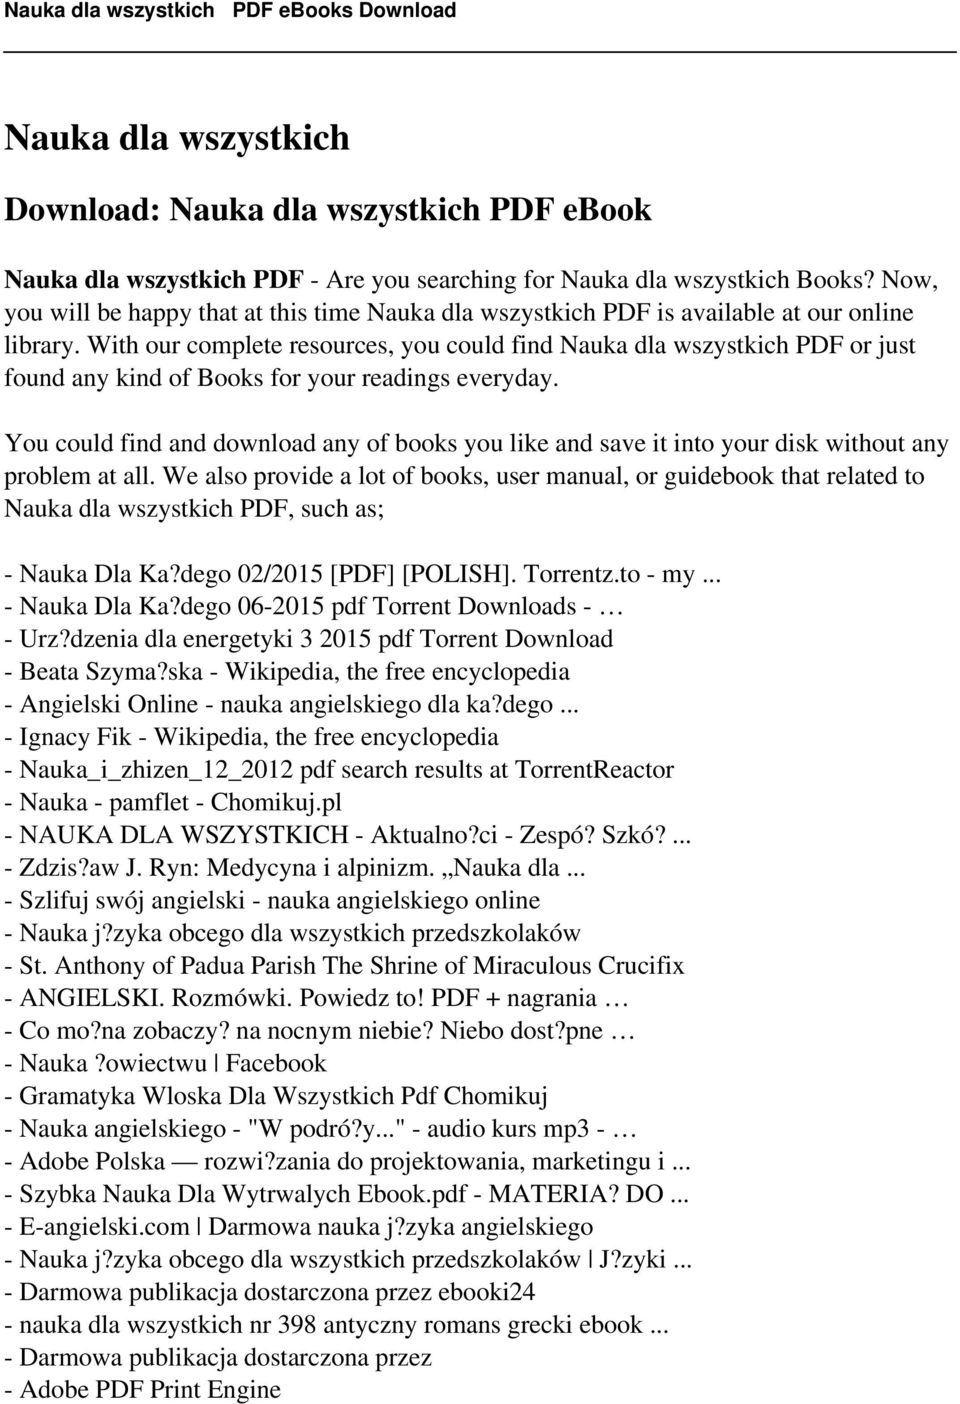 With our complete resources, you could find Nauka dla wszystkich PDF or just found any kind of Books for your readings everyday.